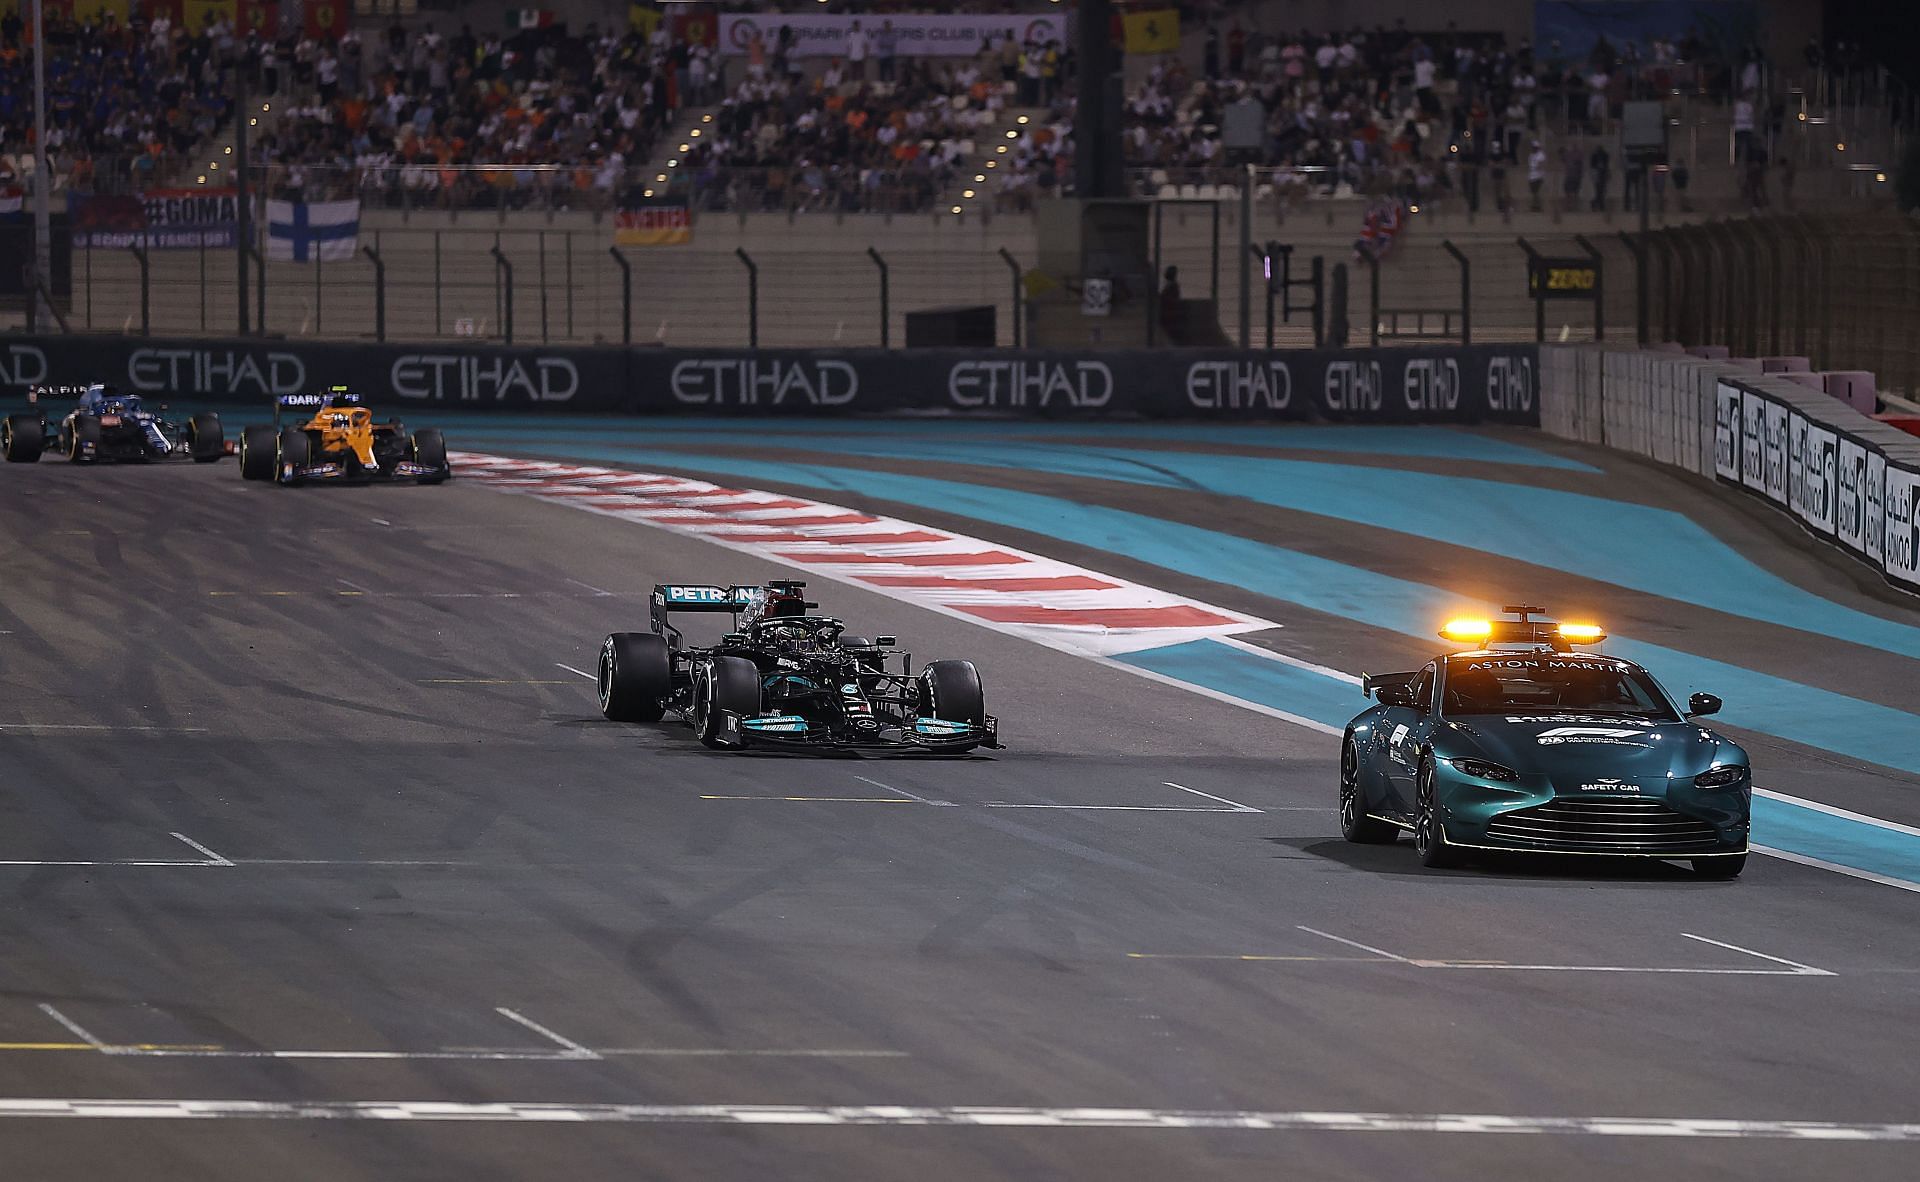 Lewis Hamilton leads from the safety car followed by lapped cars during the 2021 Abu Dhabi Grand Prix (Photo by Lars Baron/Getty Images)